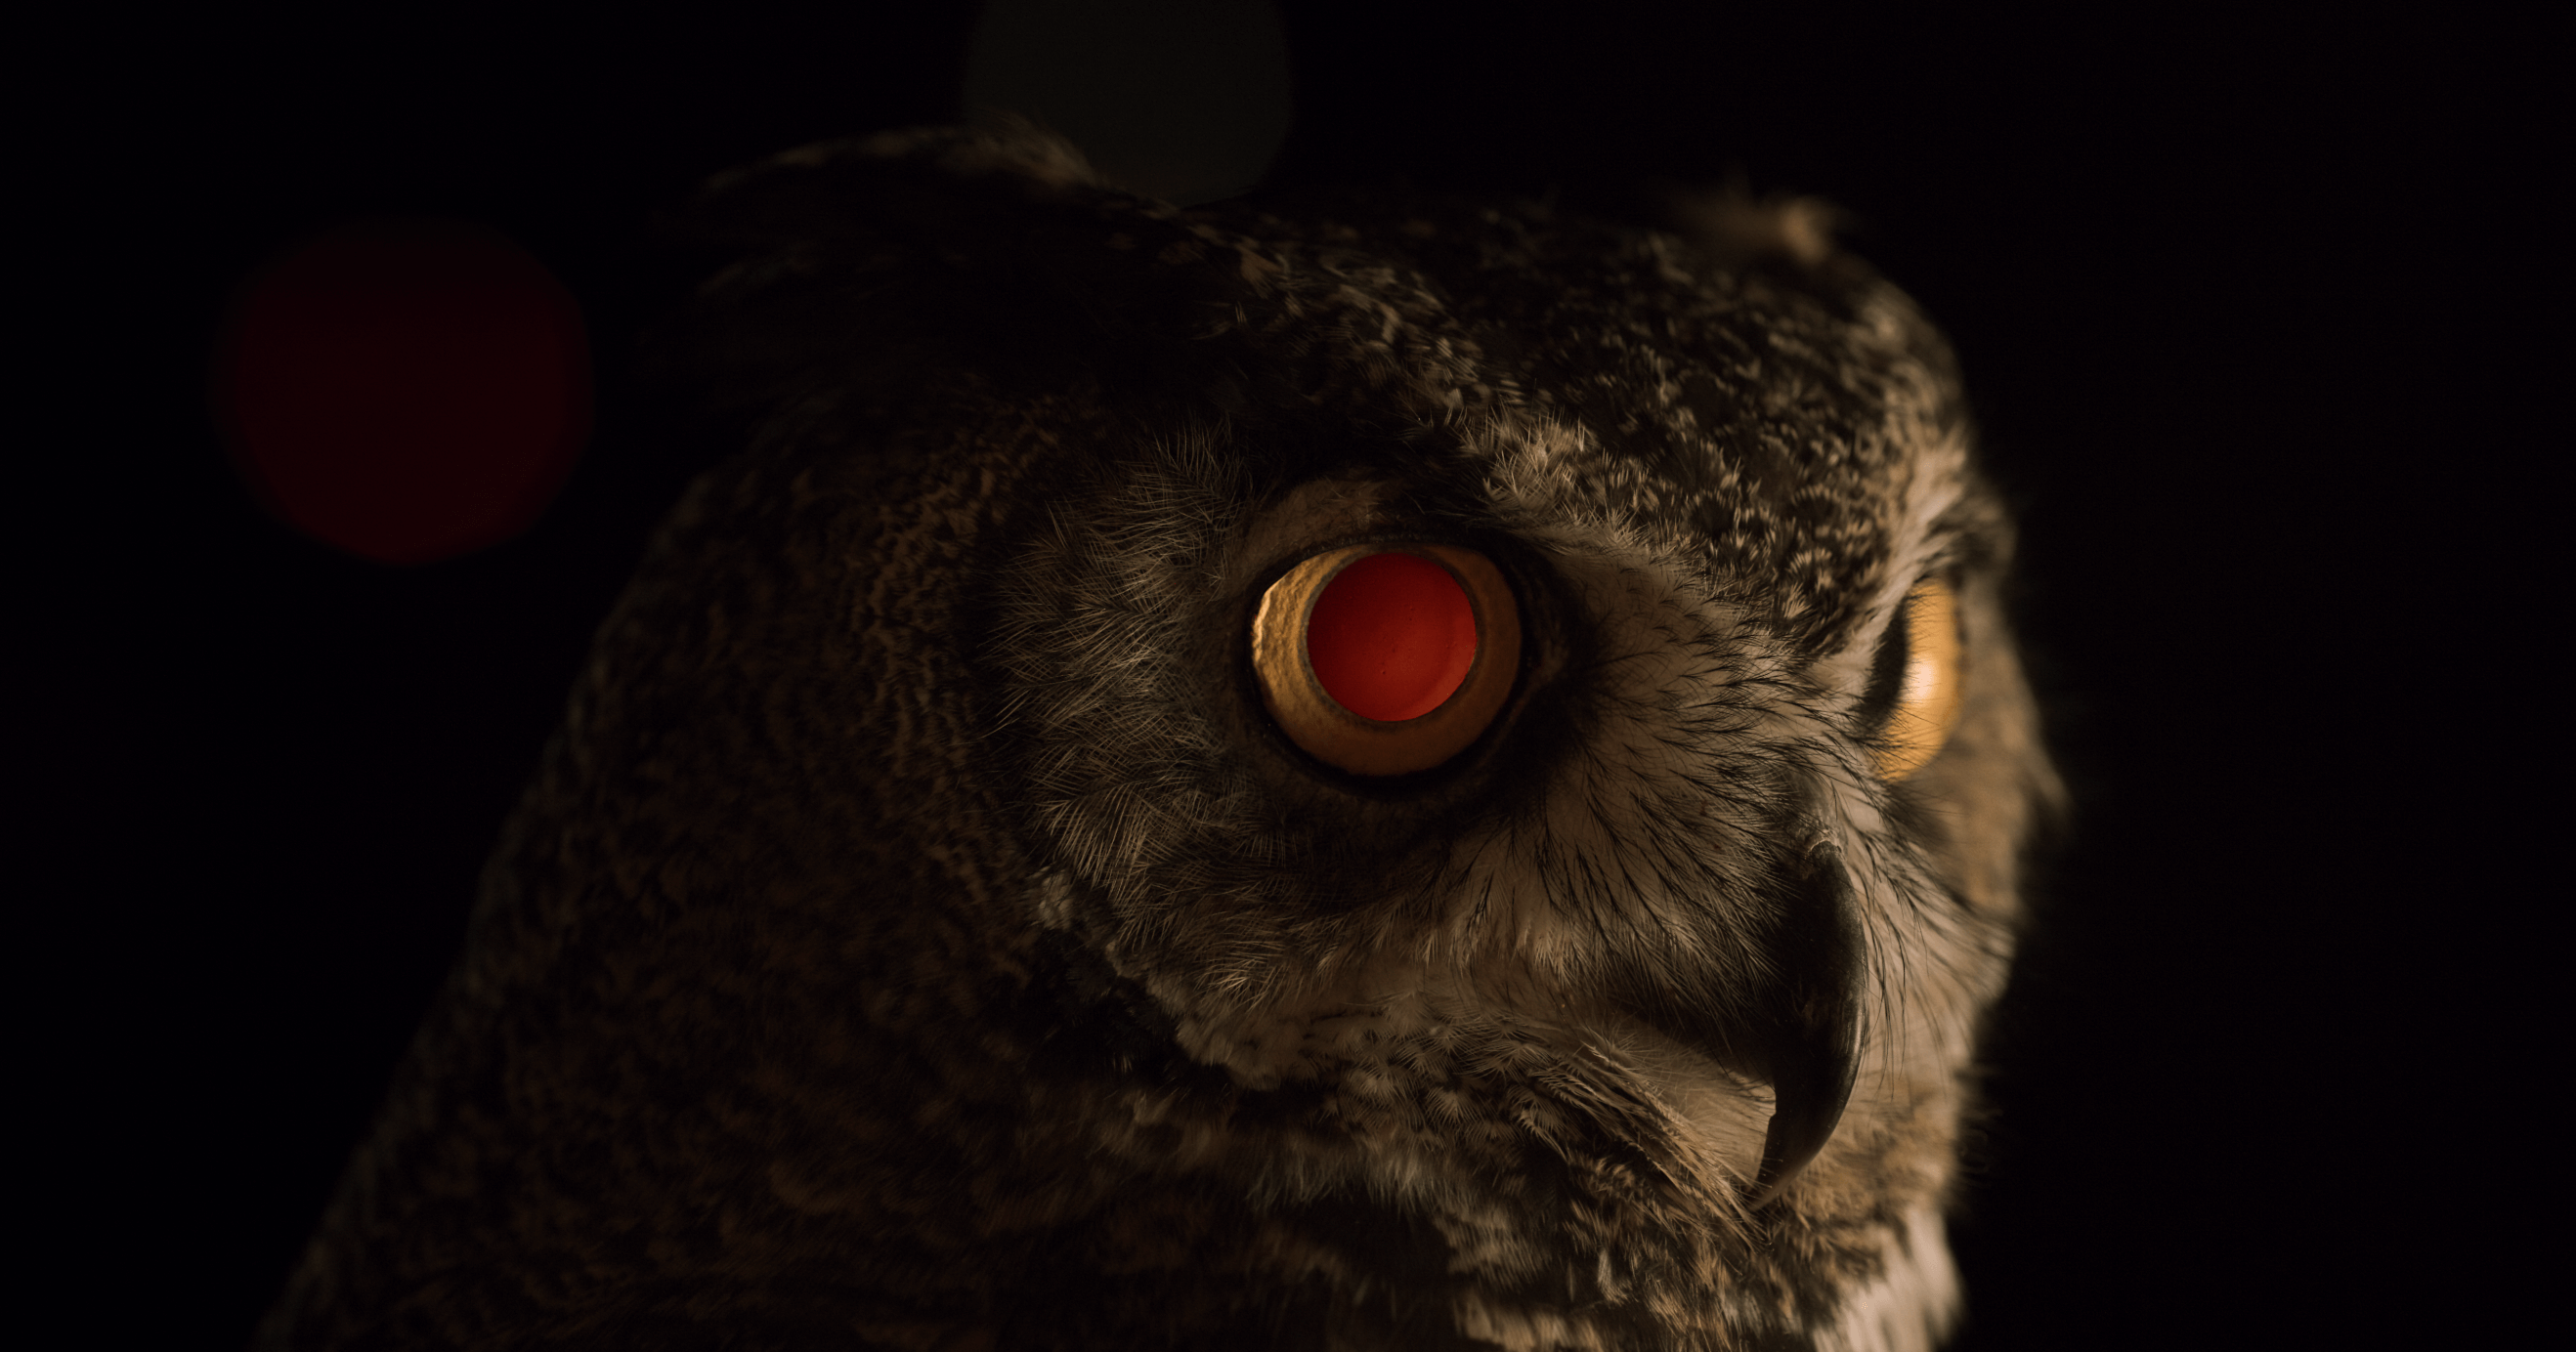 A close profile of an owl's face. One eye is distinctively red and machine-like.